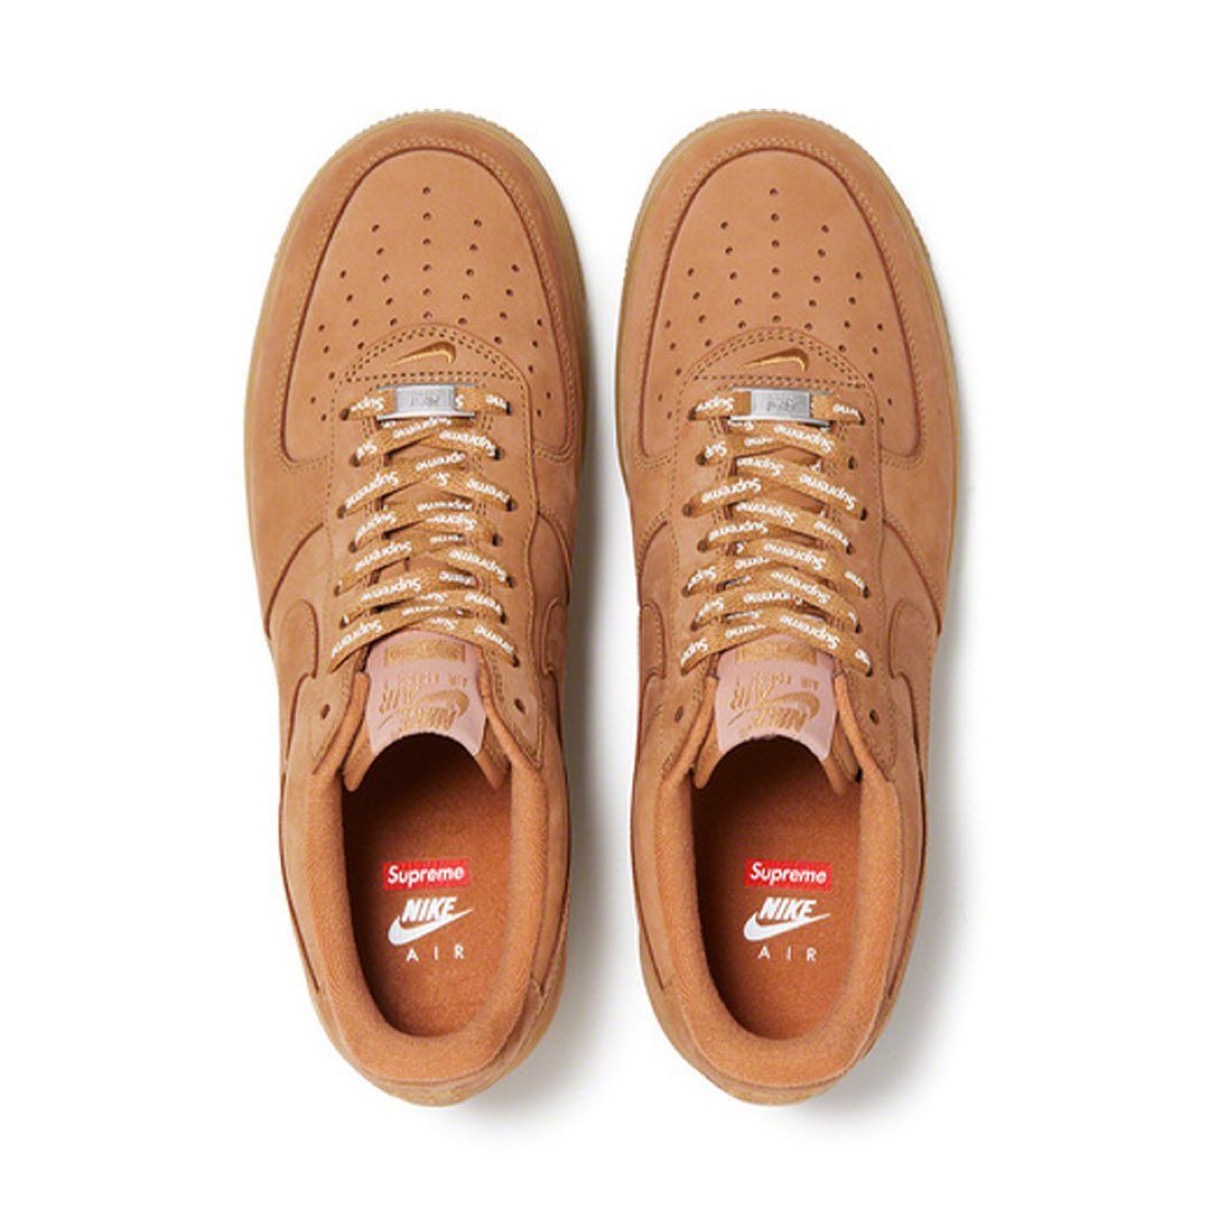 Nike × Supreme】Air Force 1 Low “Wheat”が2022FW 国内10月30日にリストック予定 | UP TO DATE